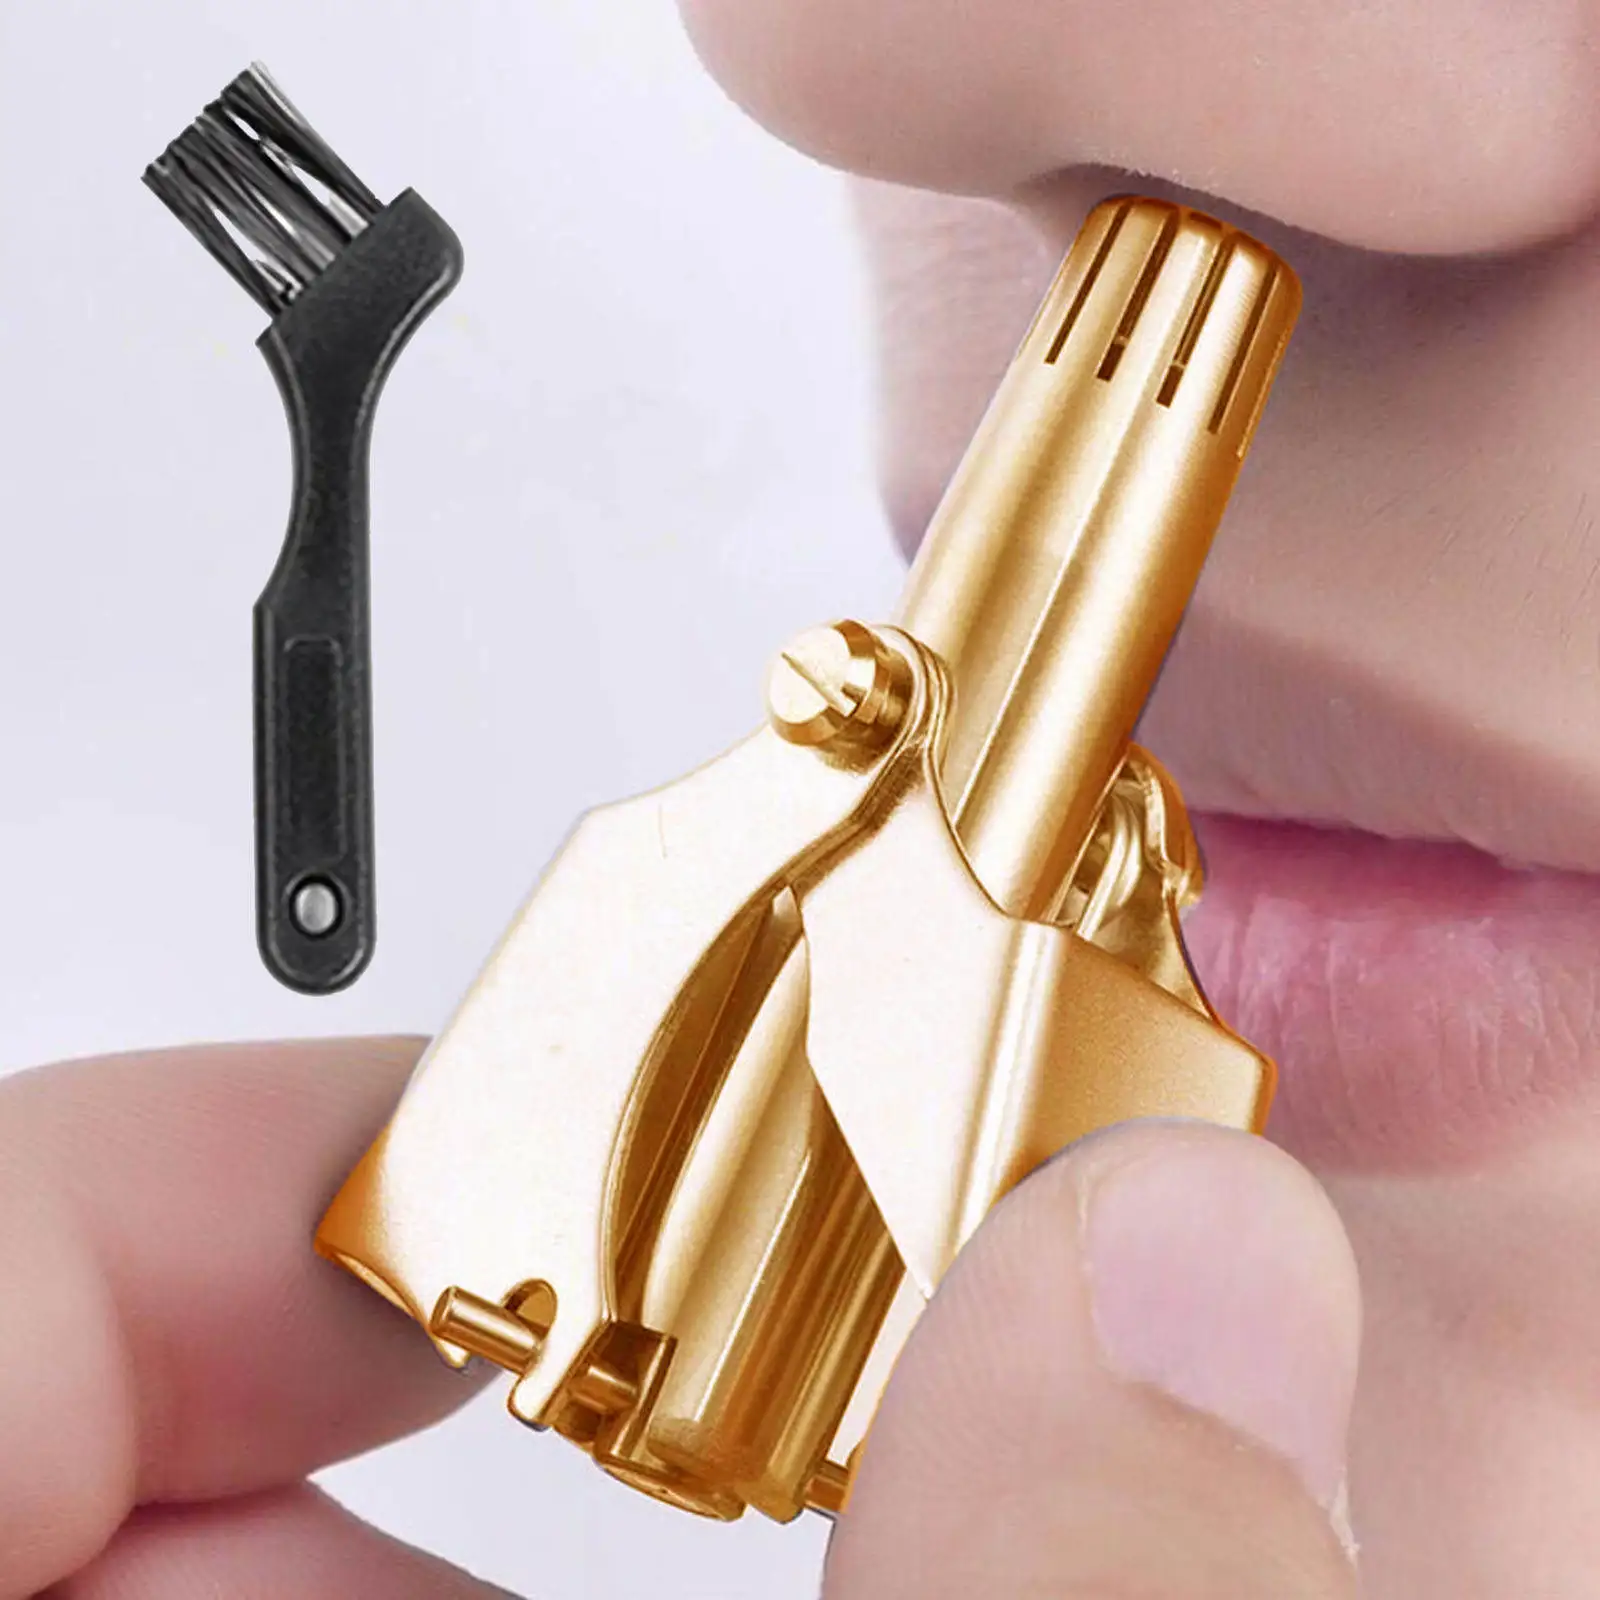 Nose Hair Trimmers with Brush Ear Nose Trimmer Shaving Machine Washable Portable Removable Removal Cleaner